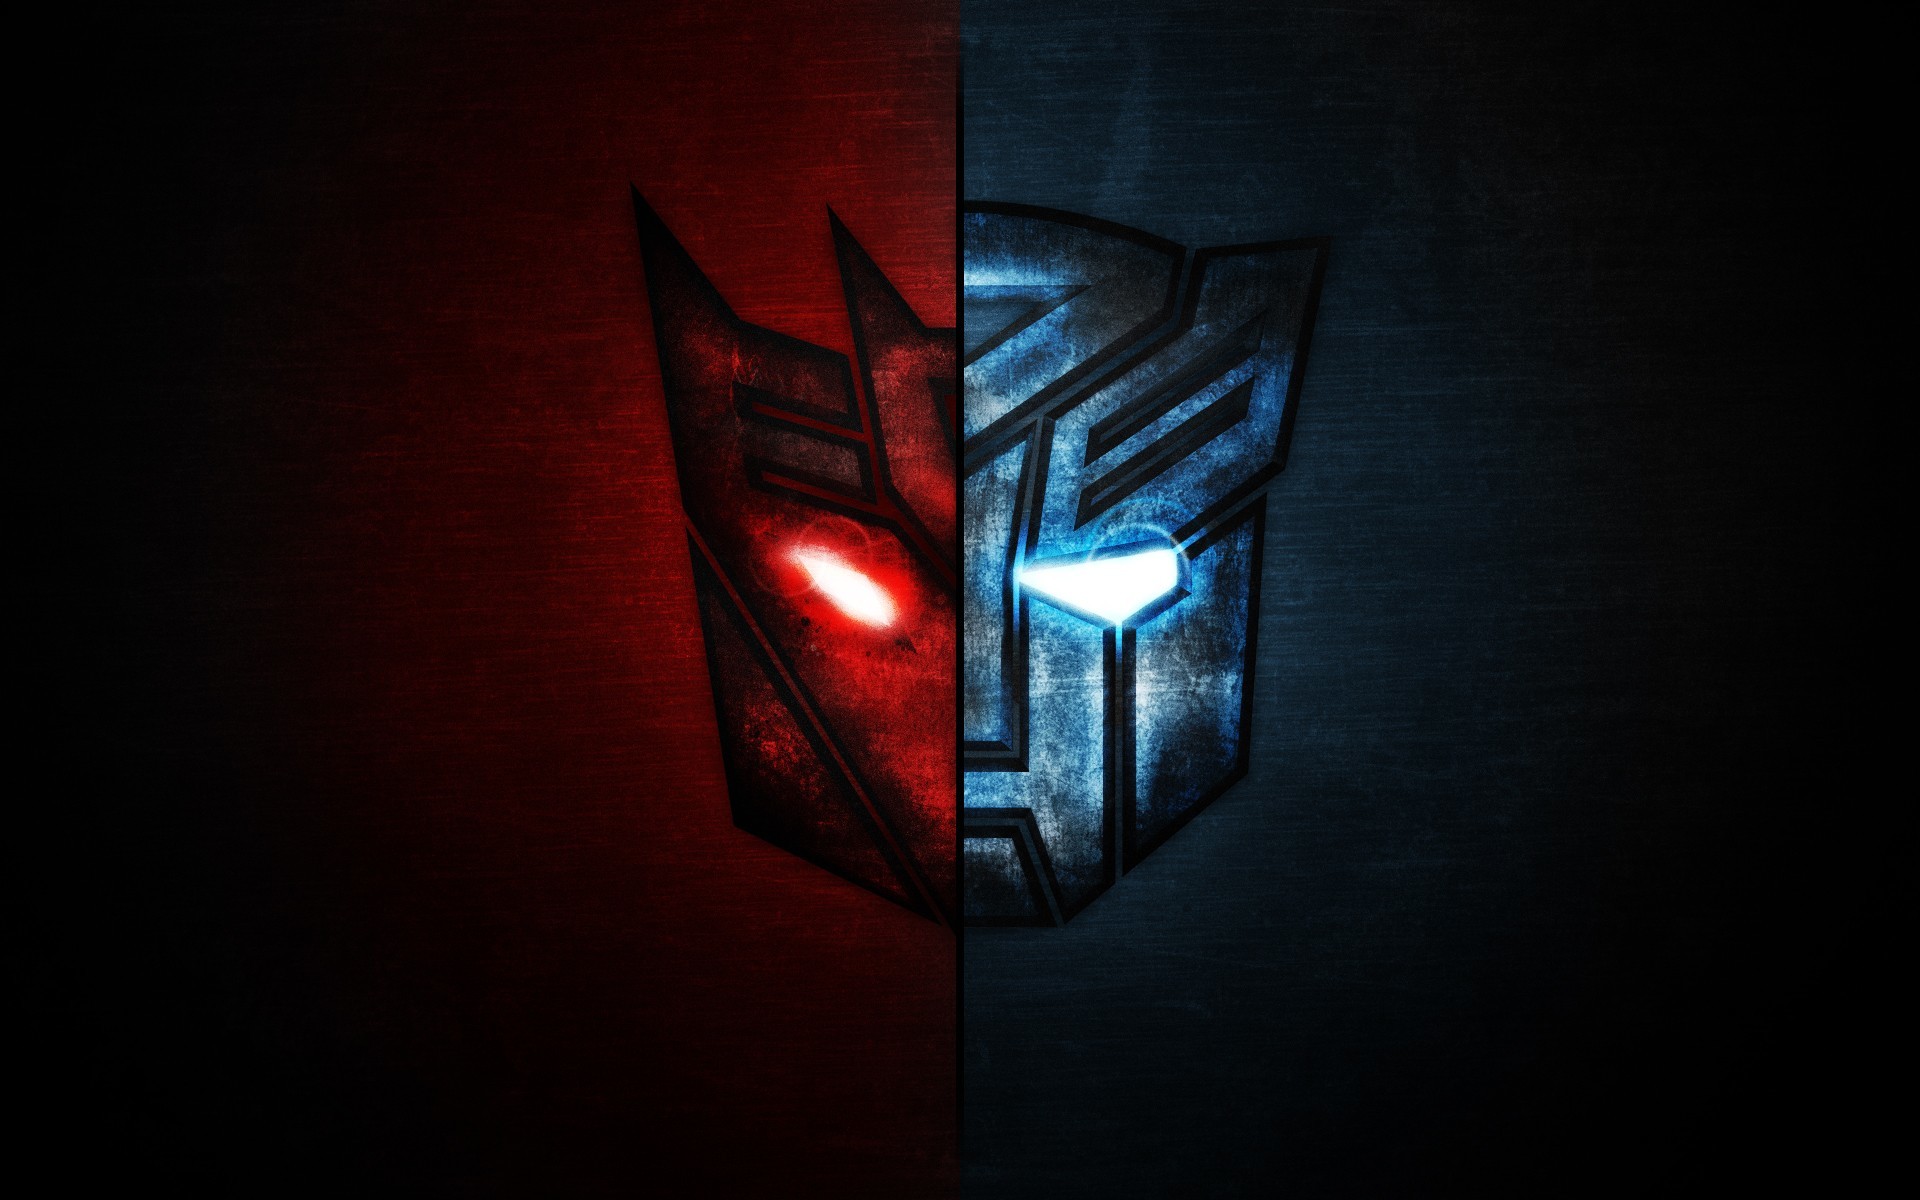 Transformers Iphone Wallpapers